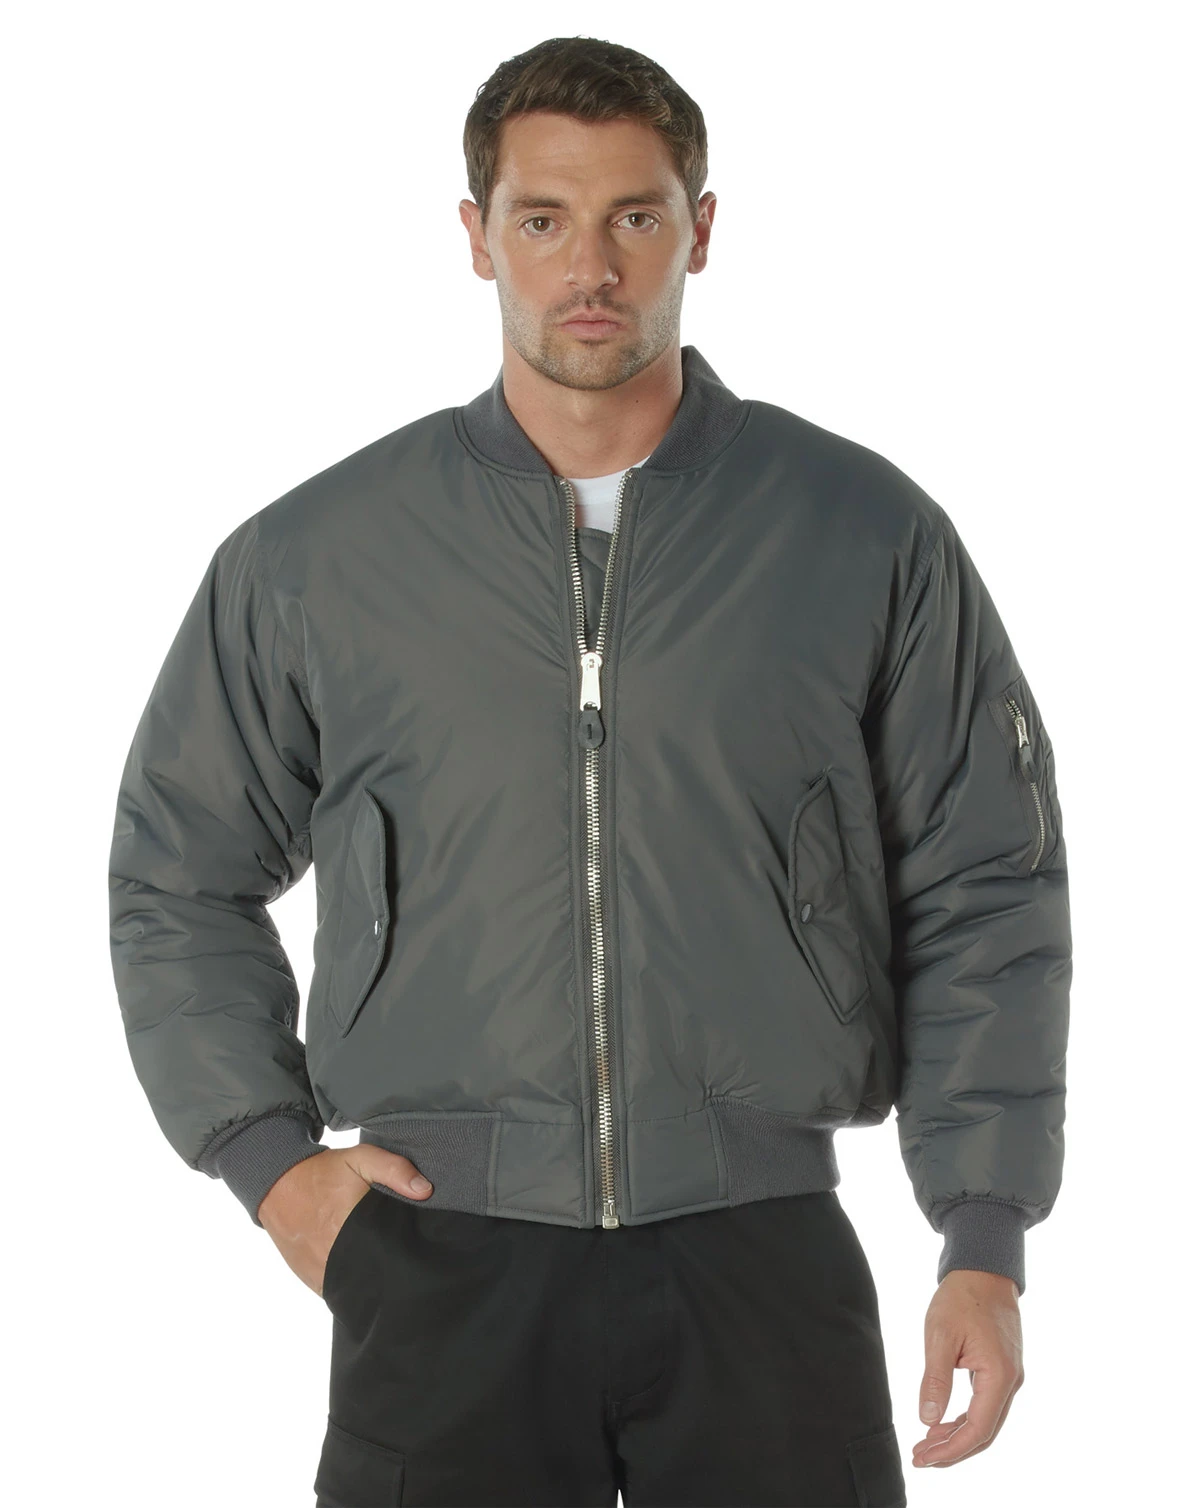 Rothco Jackets | Fixed Star Army Prices Low 